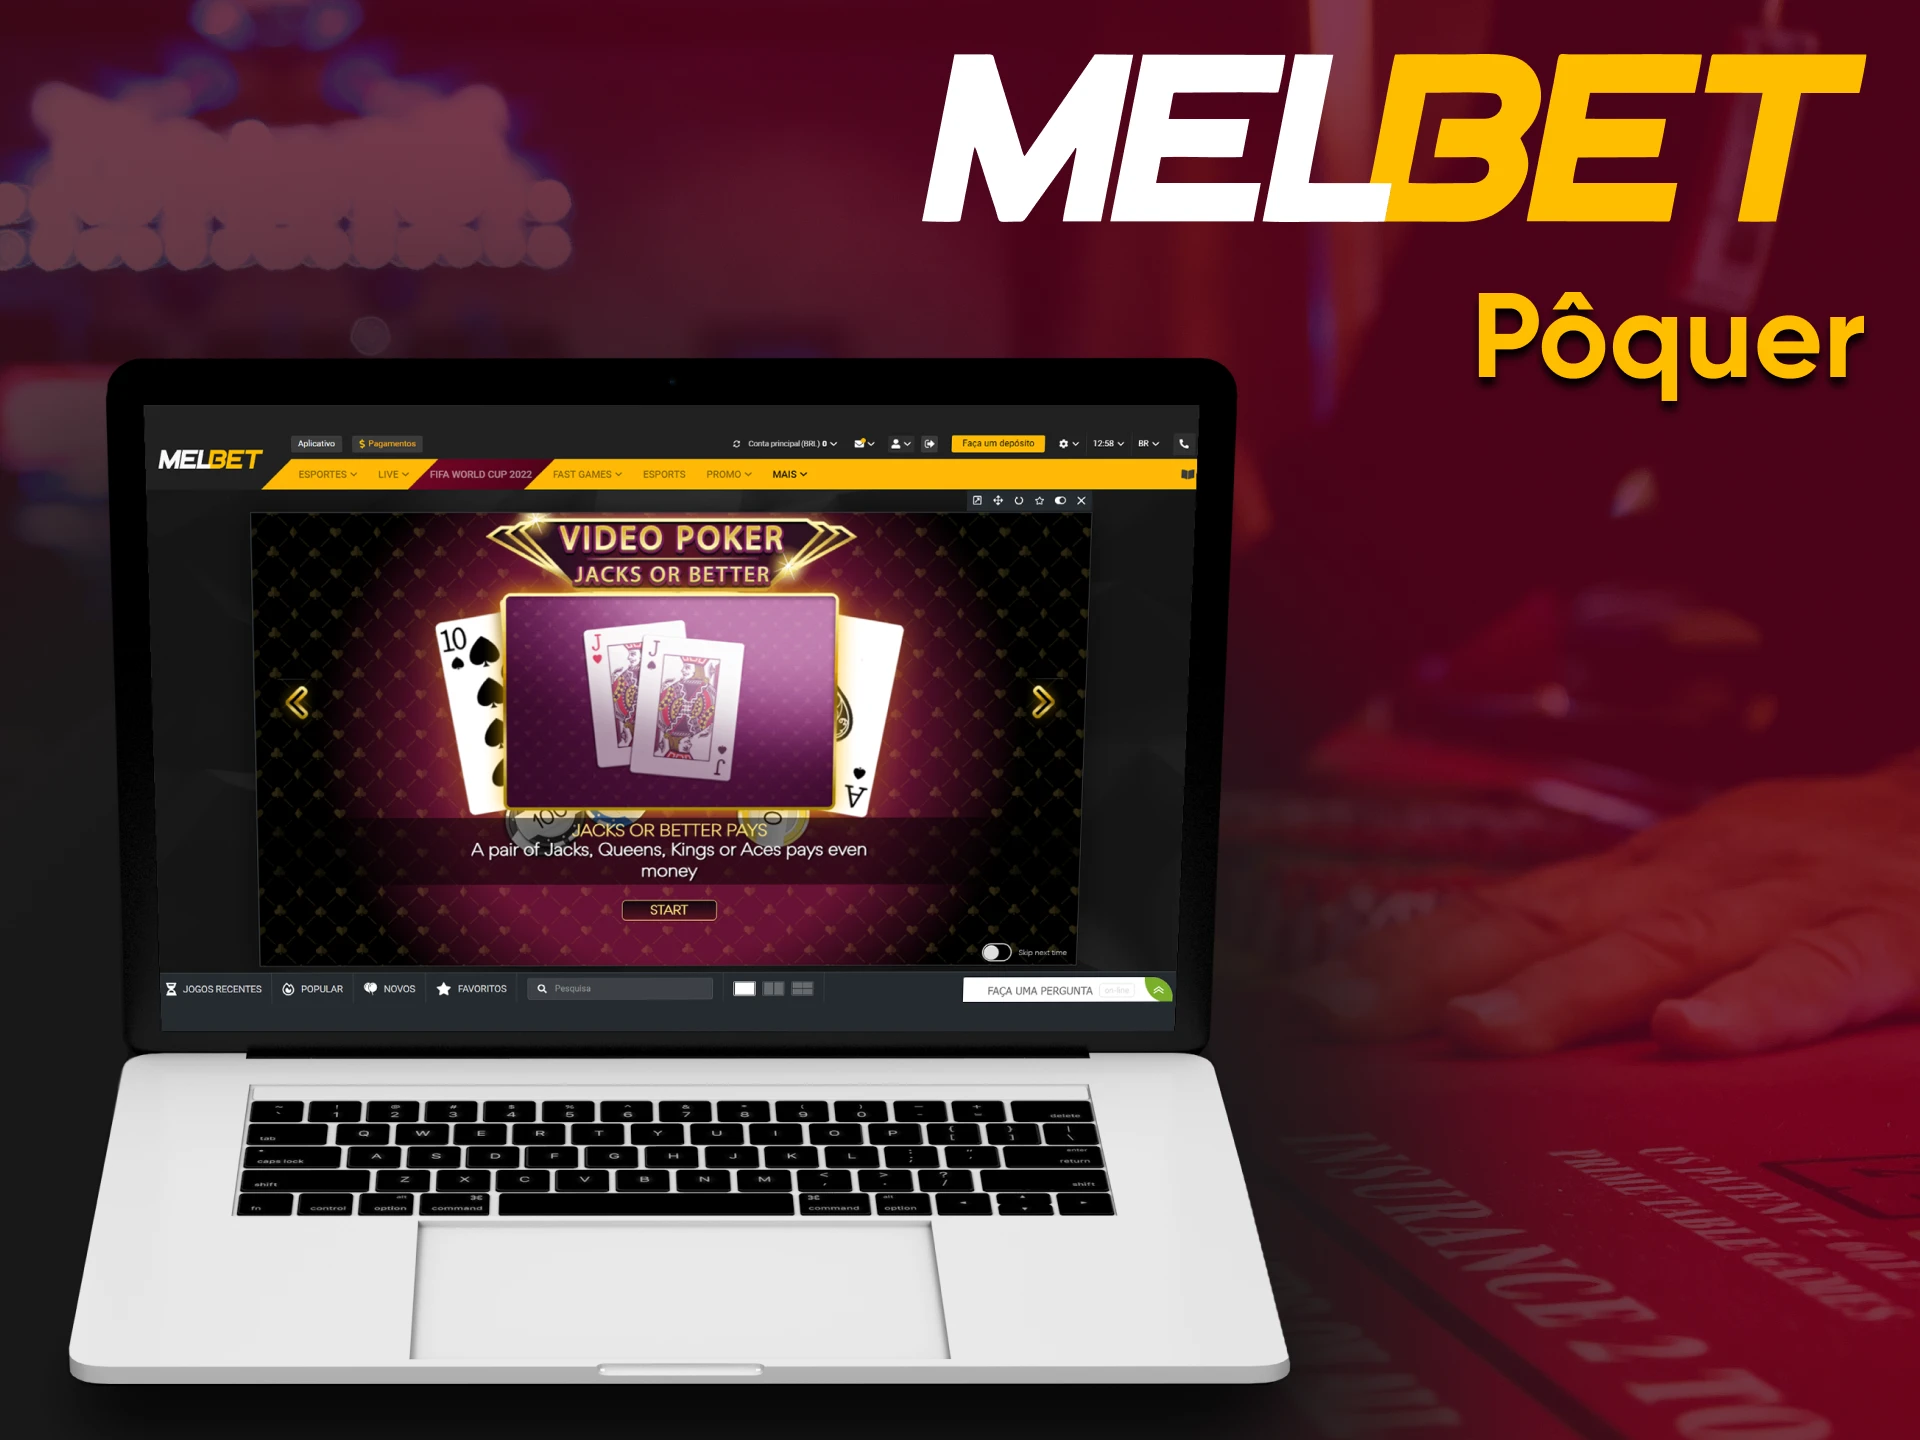 To play Poker by Melbet, go to the desired section.